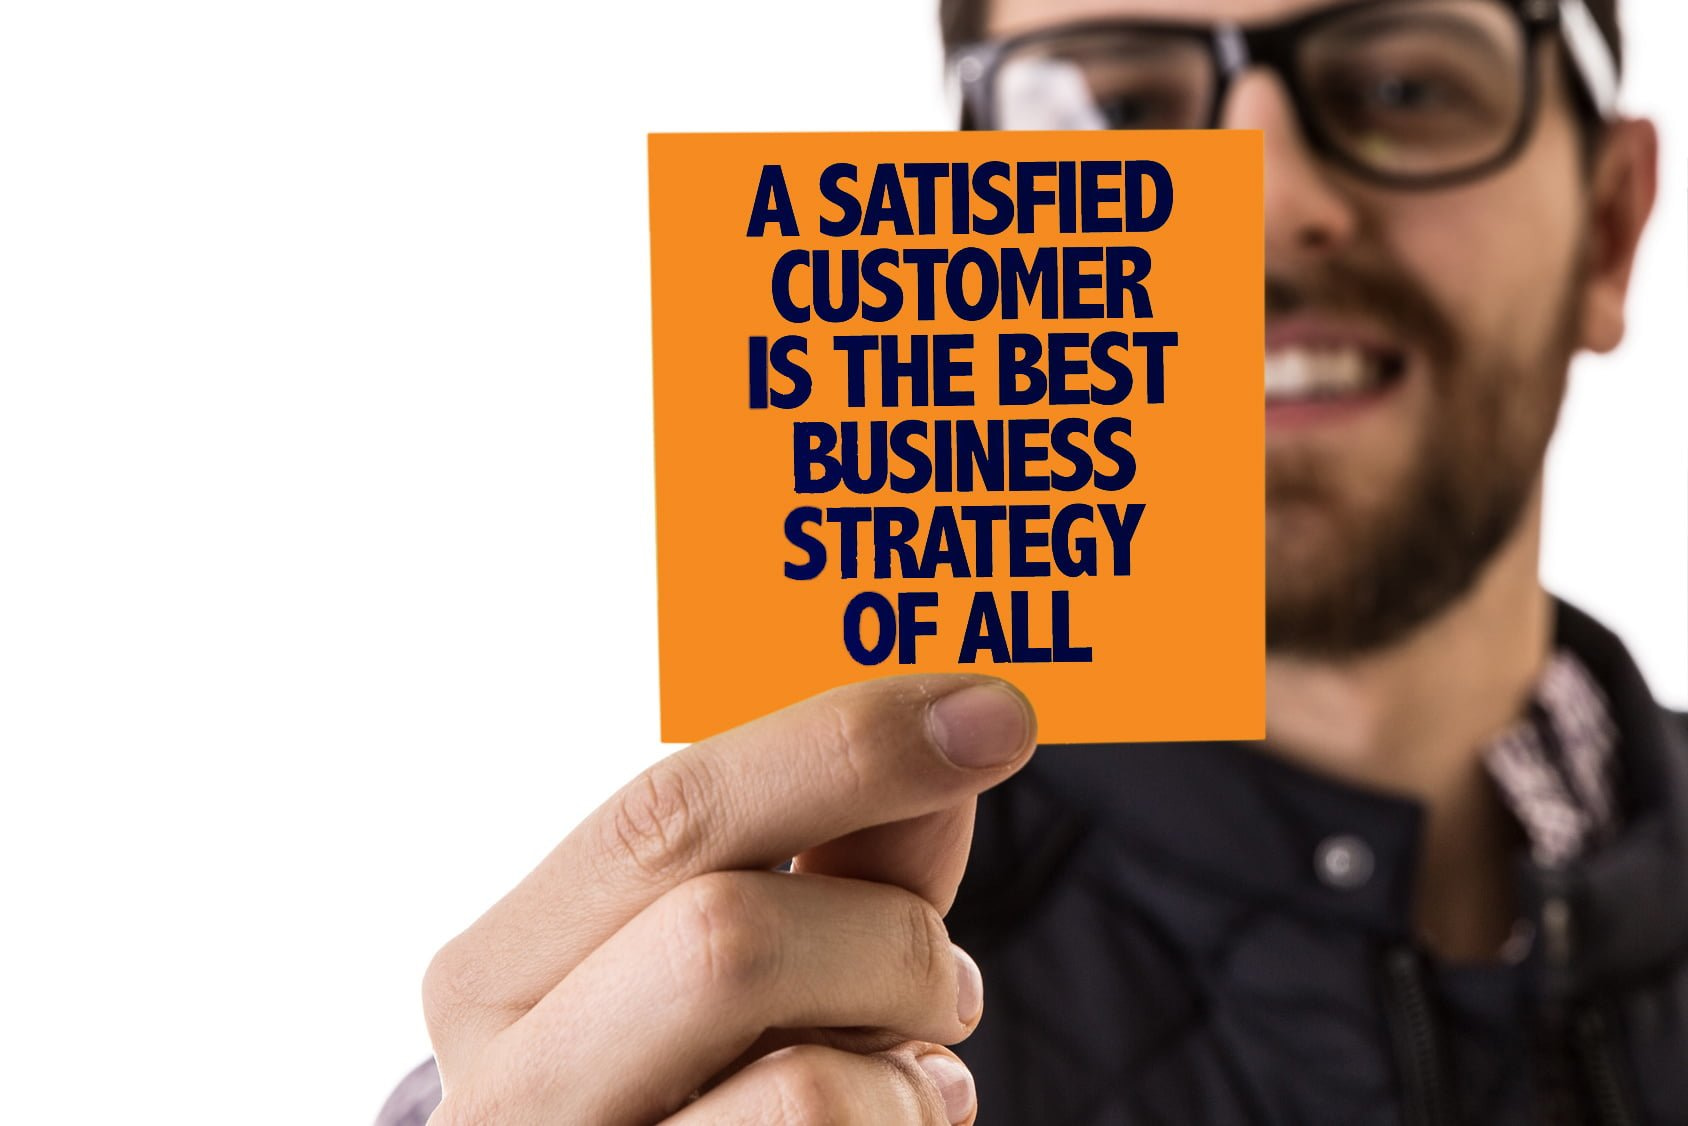 A Satisfied Customer is the Best Business Strategy Of All